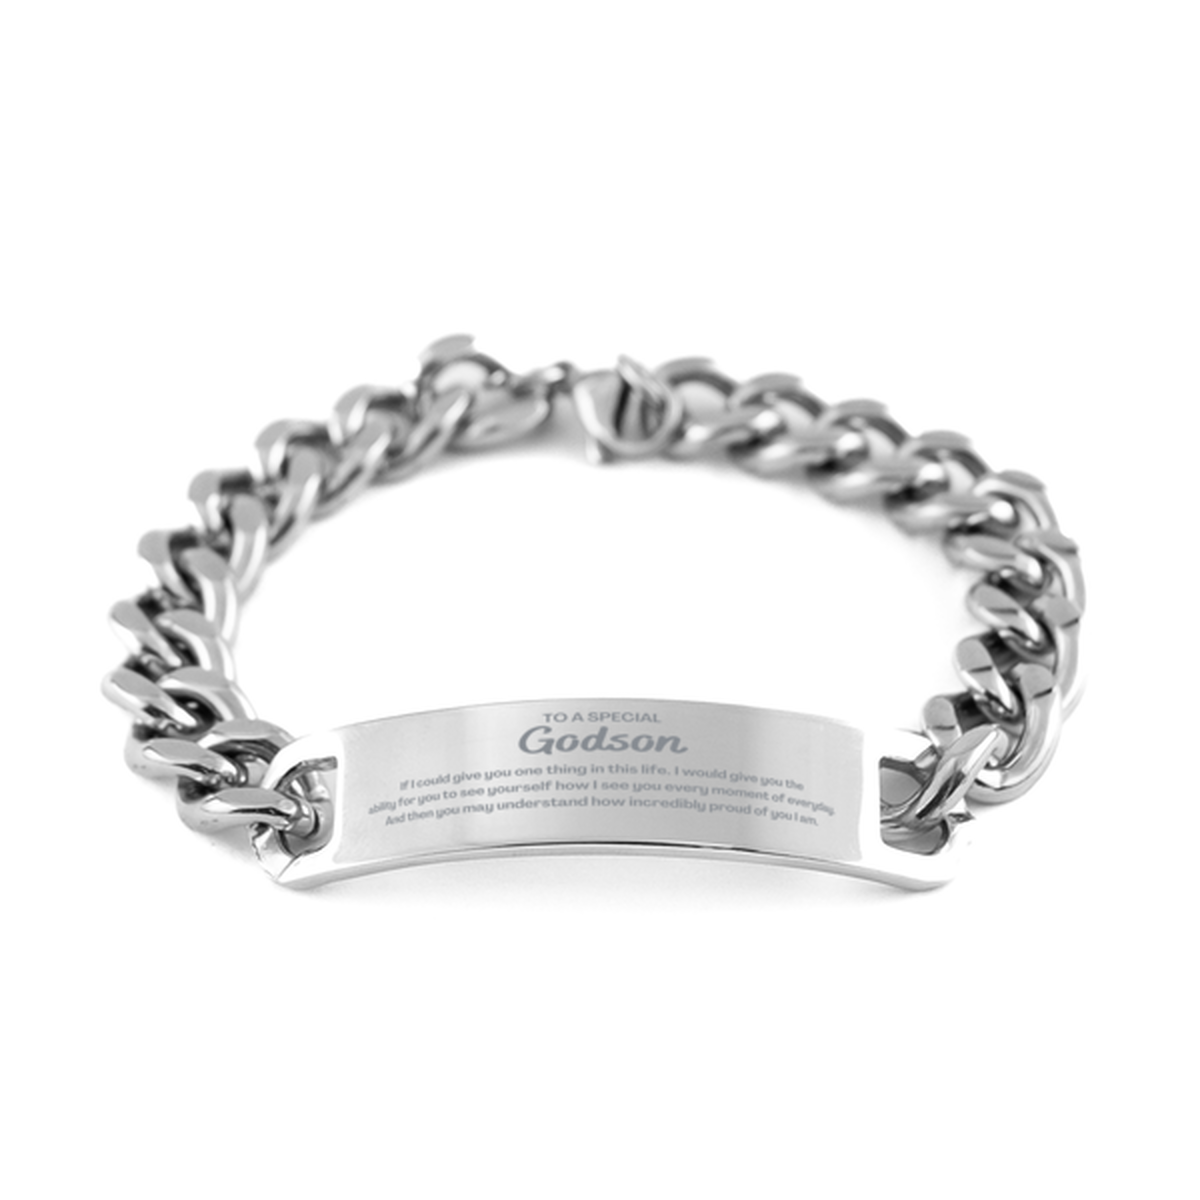 To My Godson Cuban Chain Stainless Steel Bracelet, Gifts For Godson Engraved, Inspirational Gifts for Christmas Birthday, Epic Gifts for Godson To A Special Godson how incredibly proud of you I am